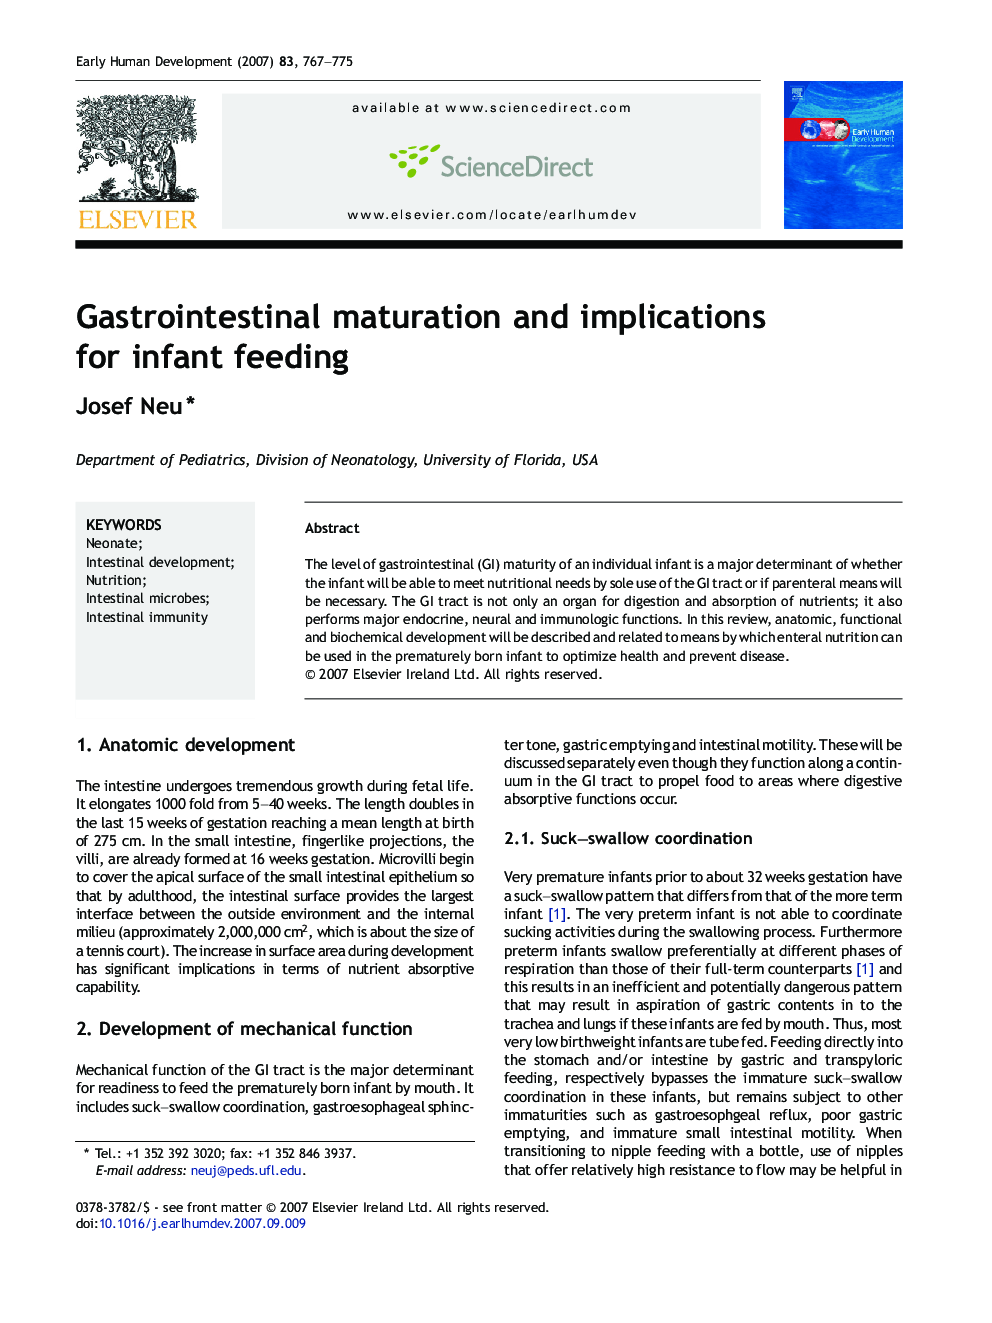 Gastrointestinal maturation and implications for infant feeding